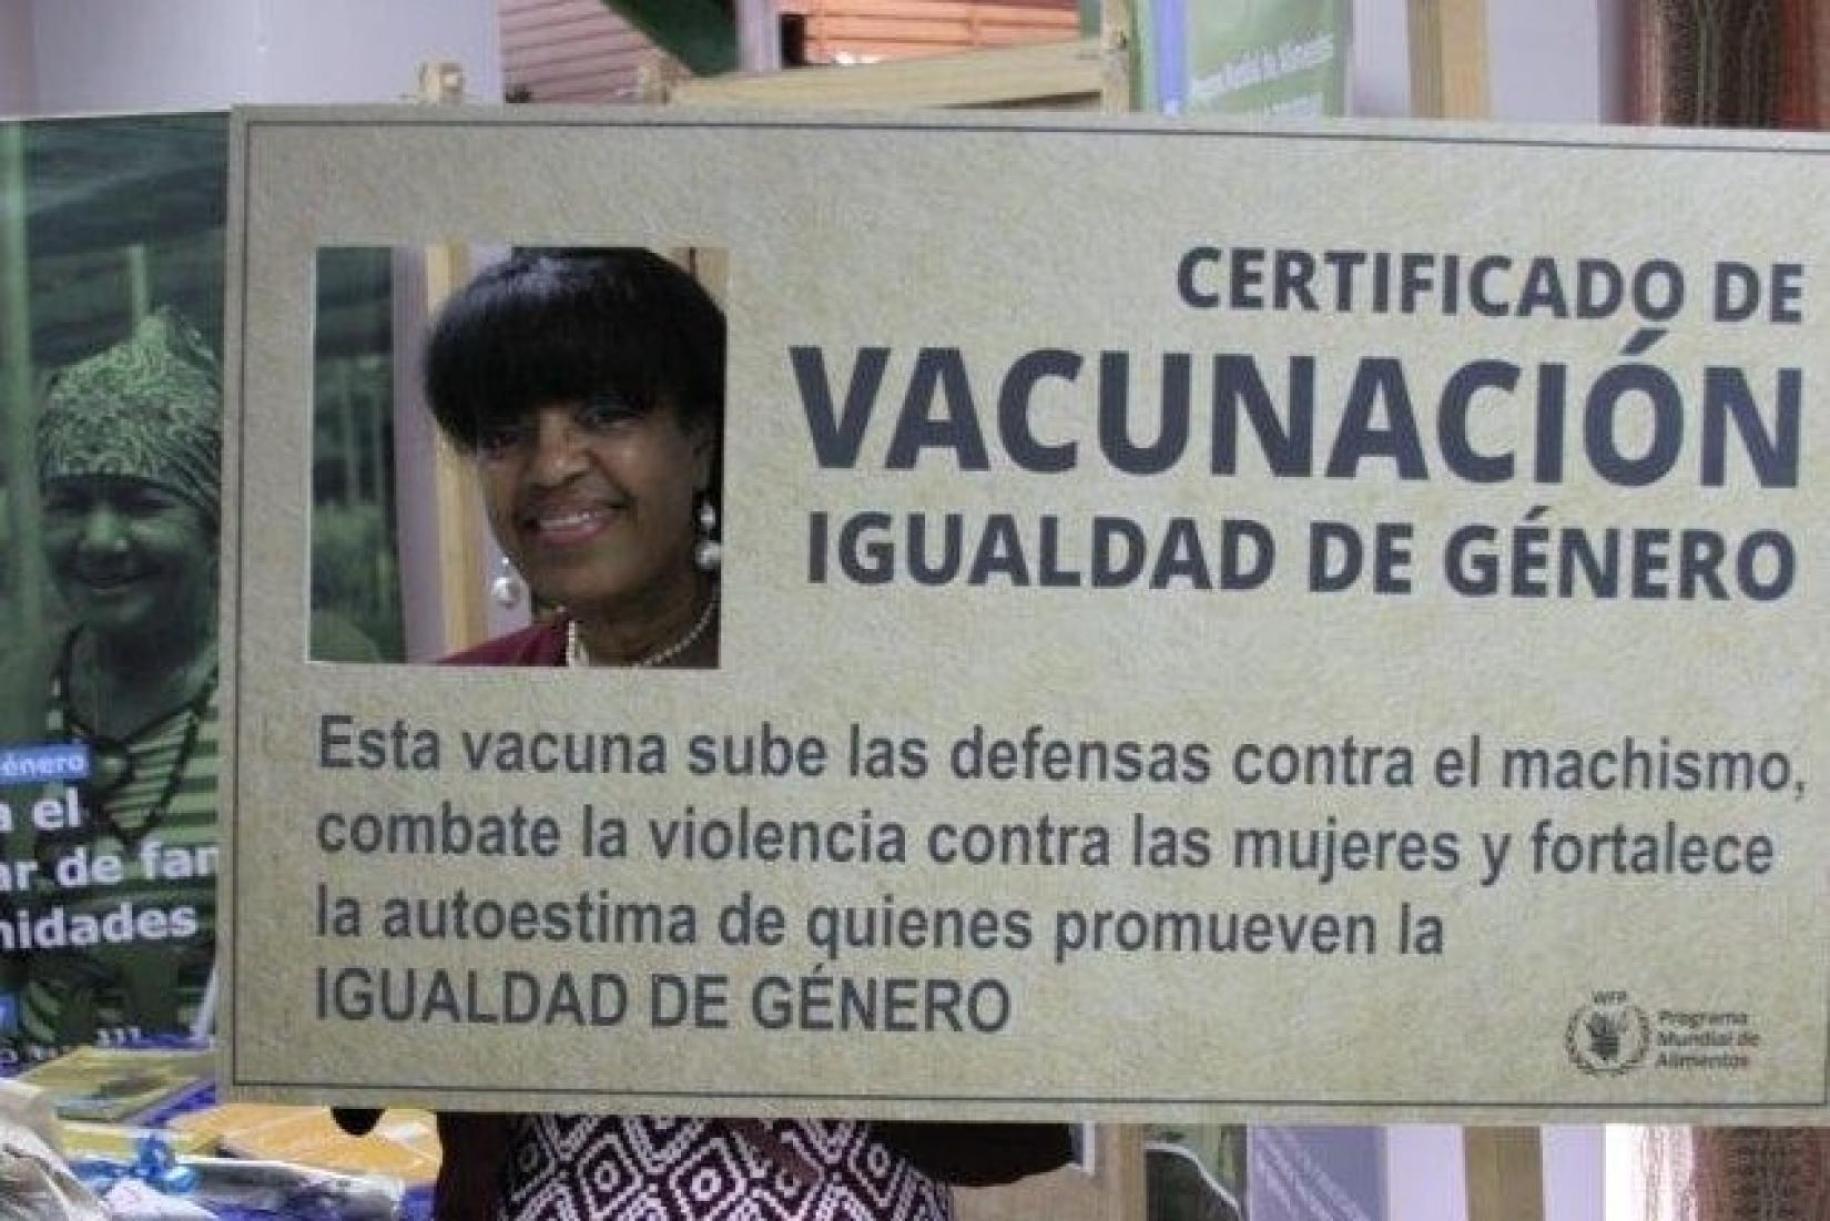 Yudith stands with her head in a cut of a giant-sized gender equality certificate.